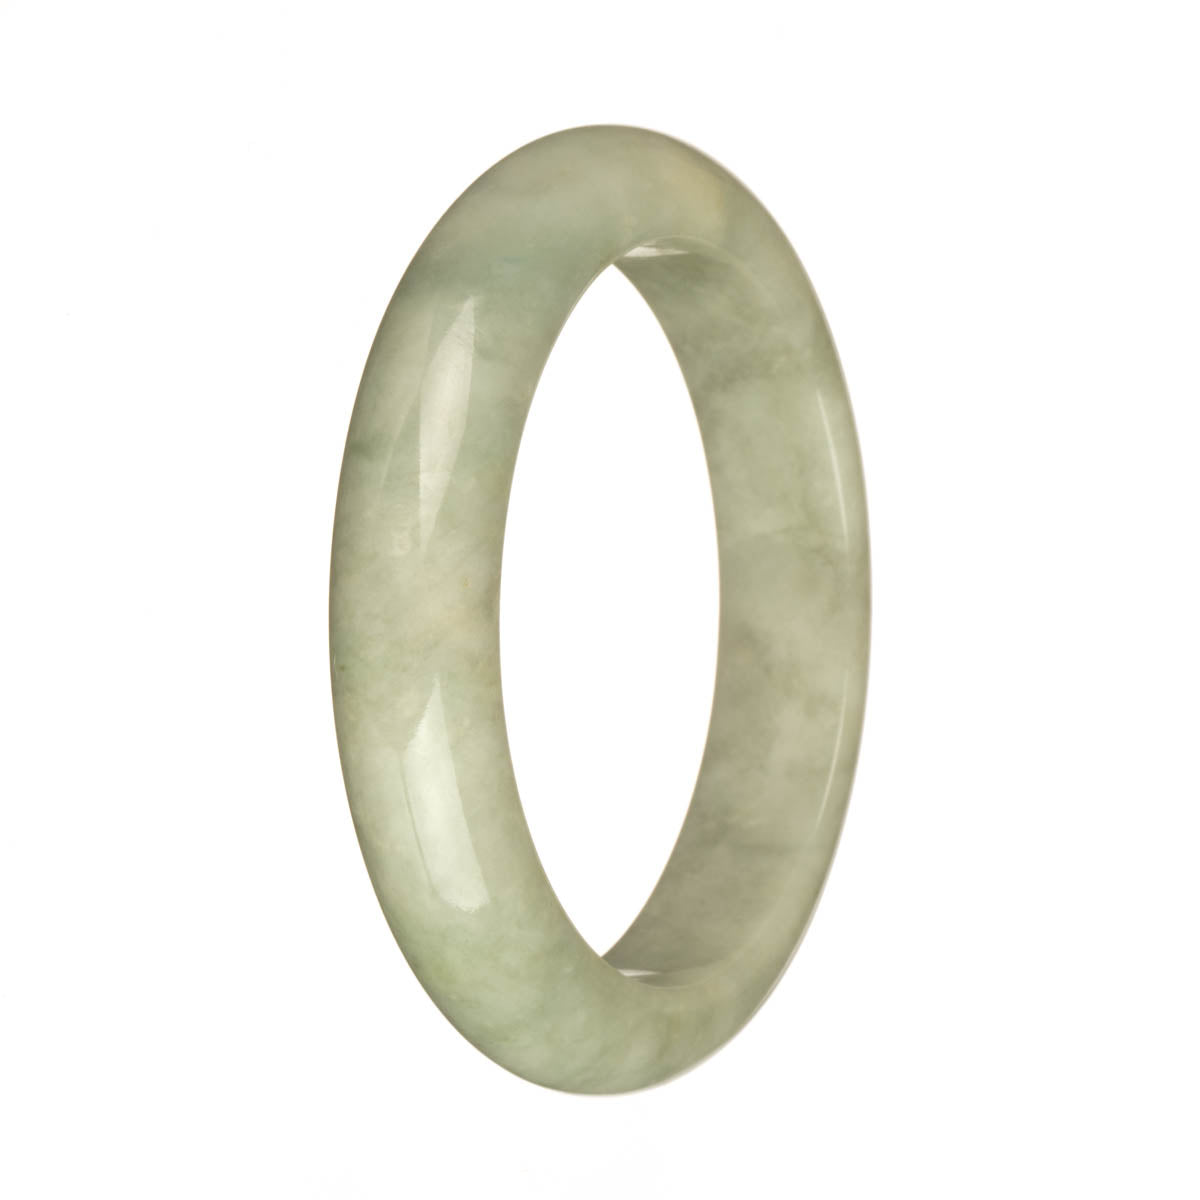 A stunning half moon bracelet made of authentic Type A light grey and pale green jadeite, featuring a deep green spot pattern. The bracelet has a diameter of 58mm and is a beautiful addition to any jewelry collection.